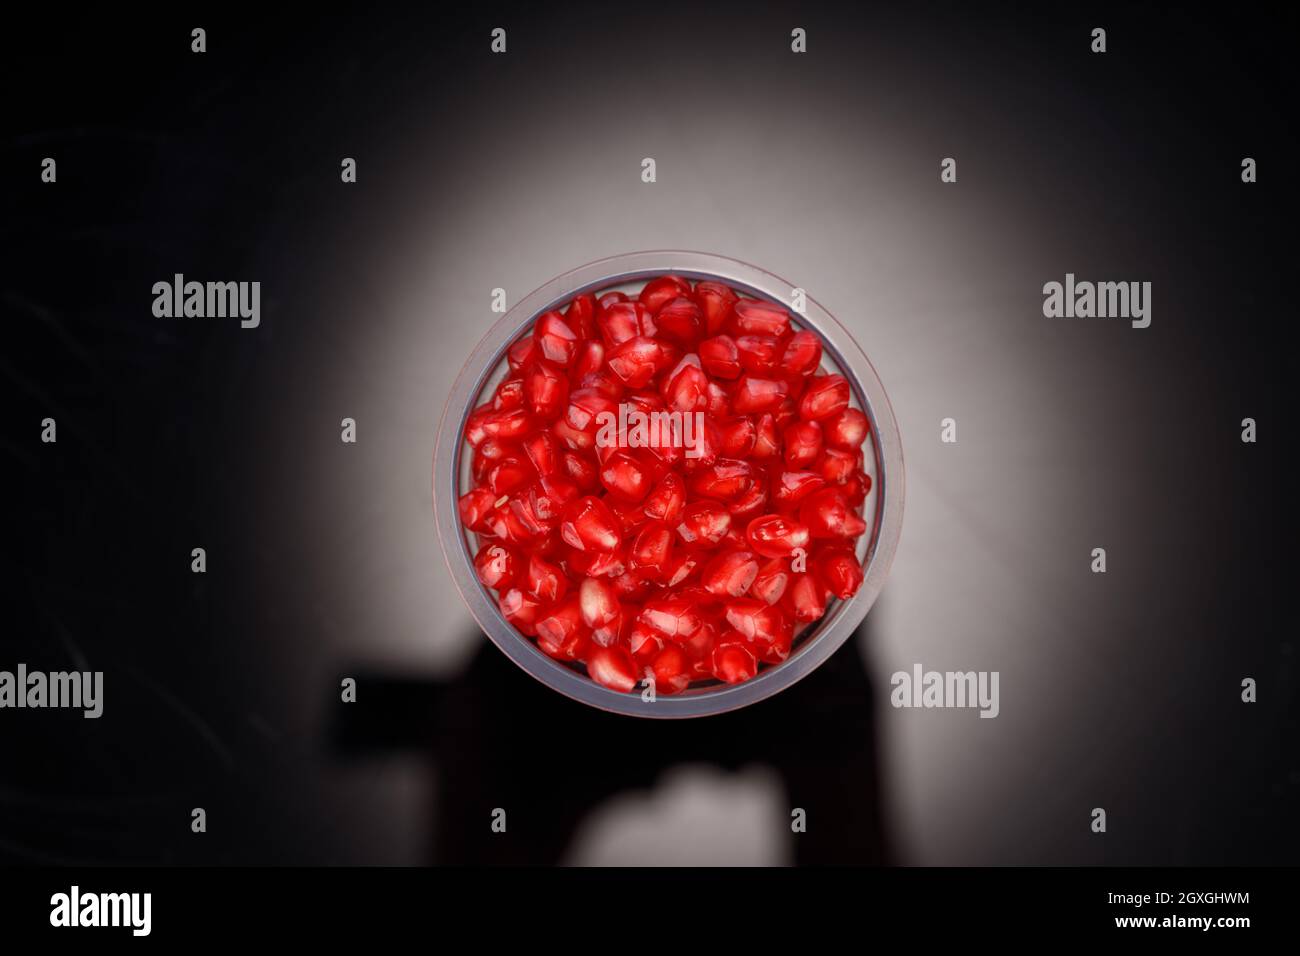 Fresh Pomegranate seed arranged in a glass  with black  background, isolated. Stock Photo